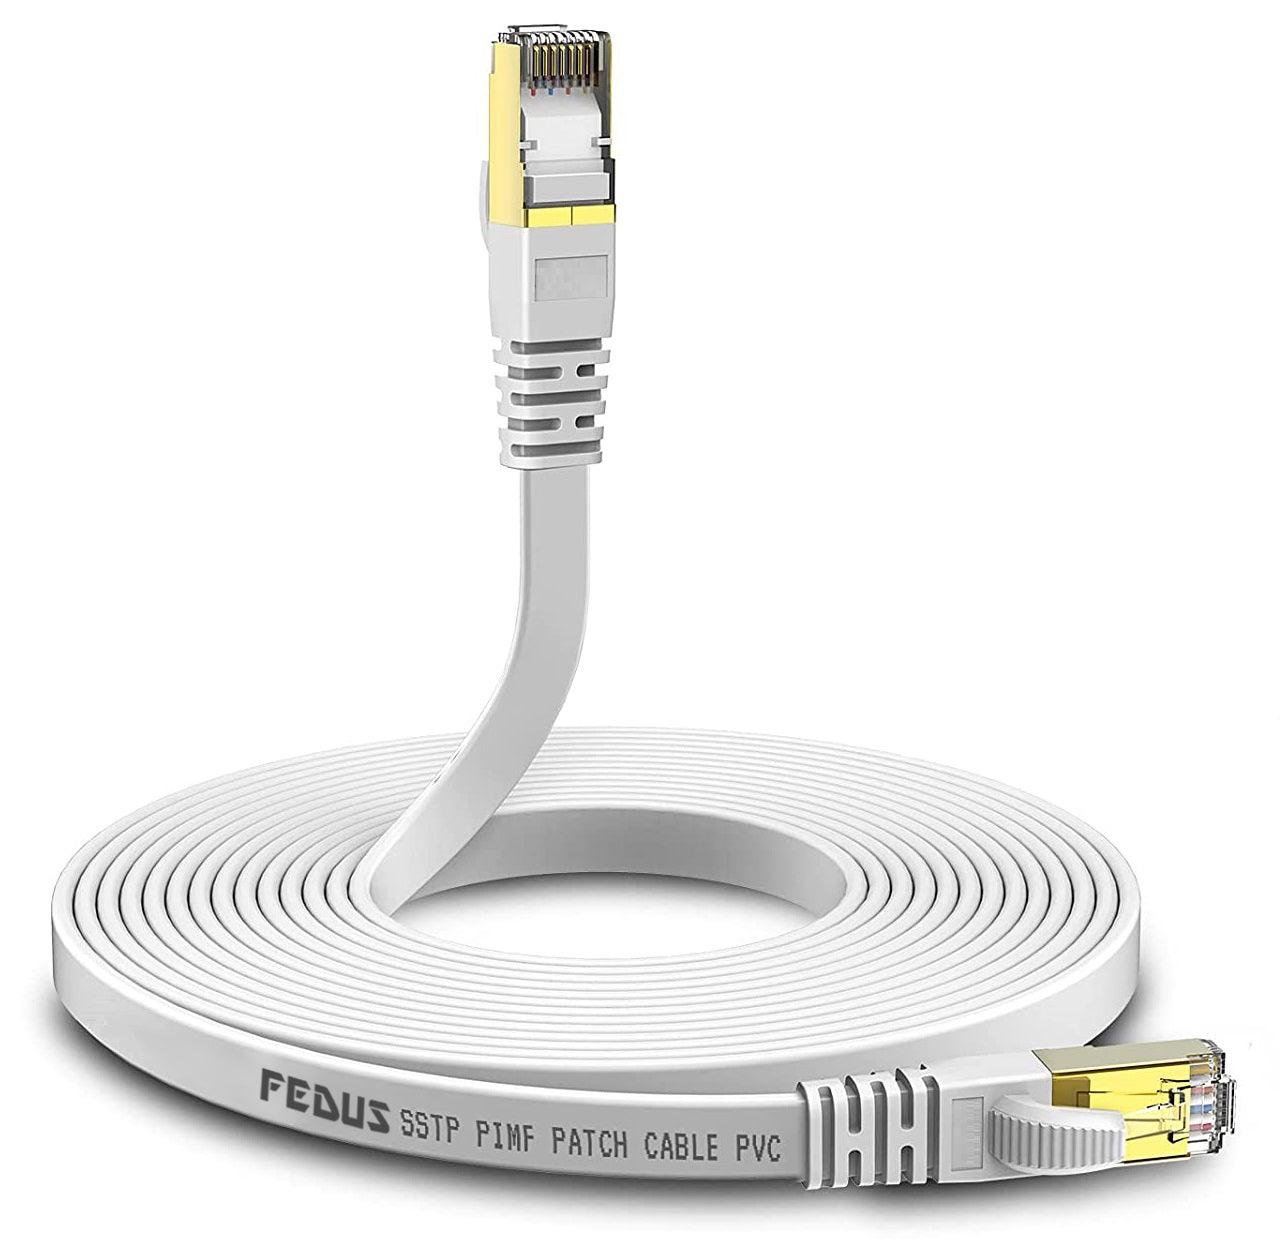 FEDUS Cat7 Ethernet Cable, Pure Copper Flat RJ45 LAN Cable Cable 10 Gigabit 600MHZ Patch Network Cable Internet Cable RJ45 Wire Cord to Computer for Gaming, Modem, Router, LAN ADSL - FEDUS